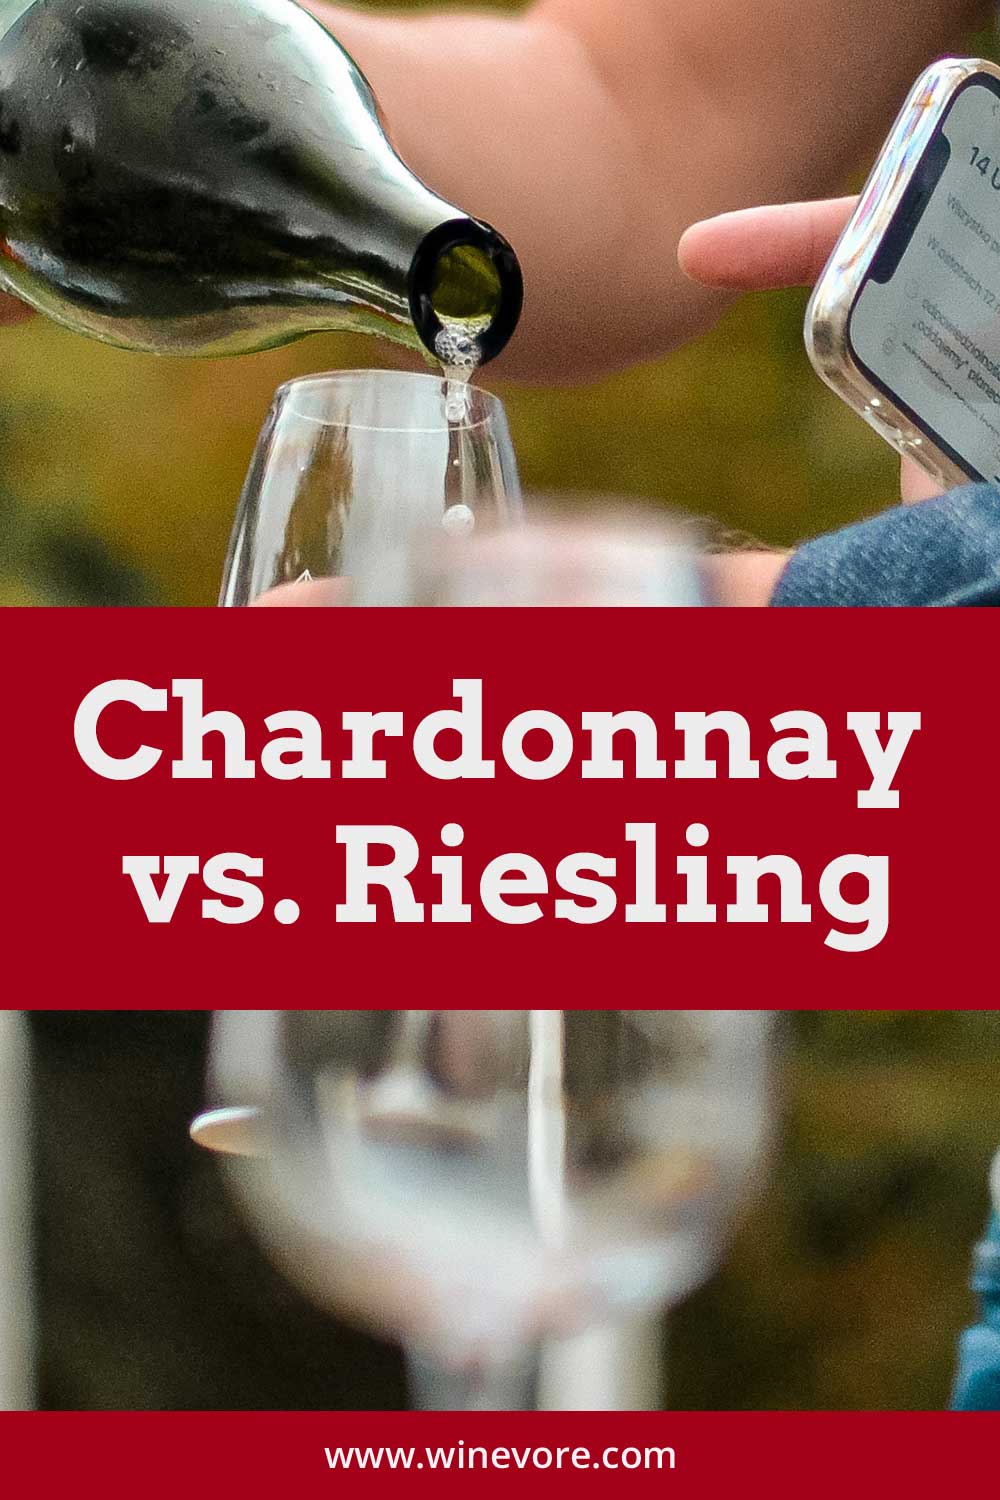 White wine being poured from a bottle - Chardonnay vs. Riesling